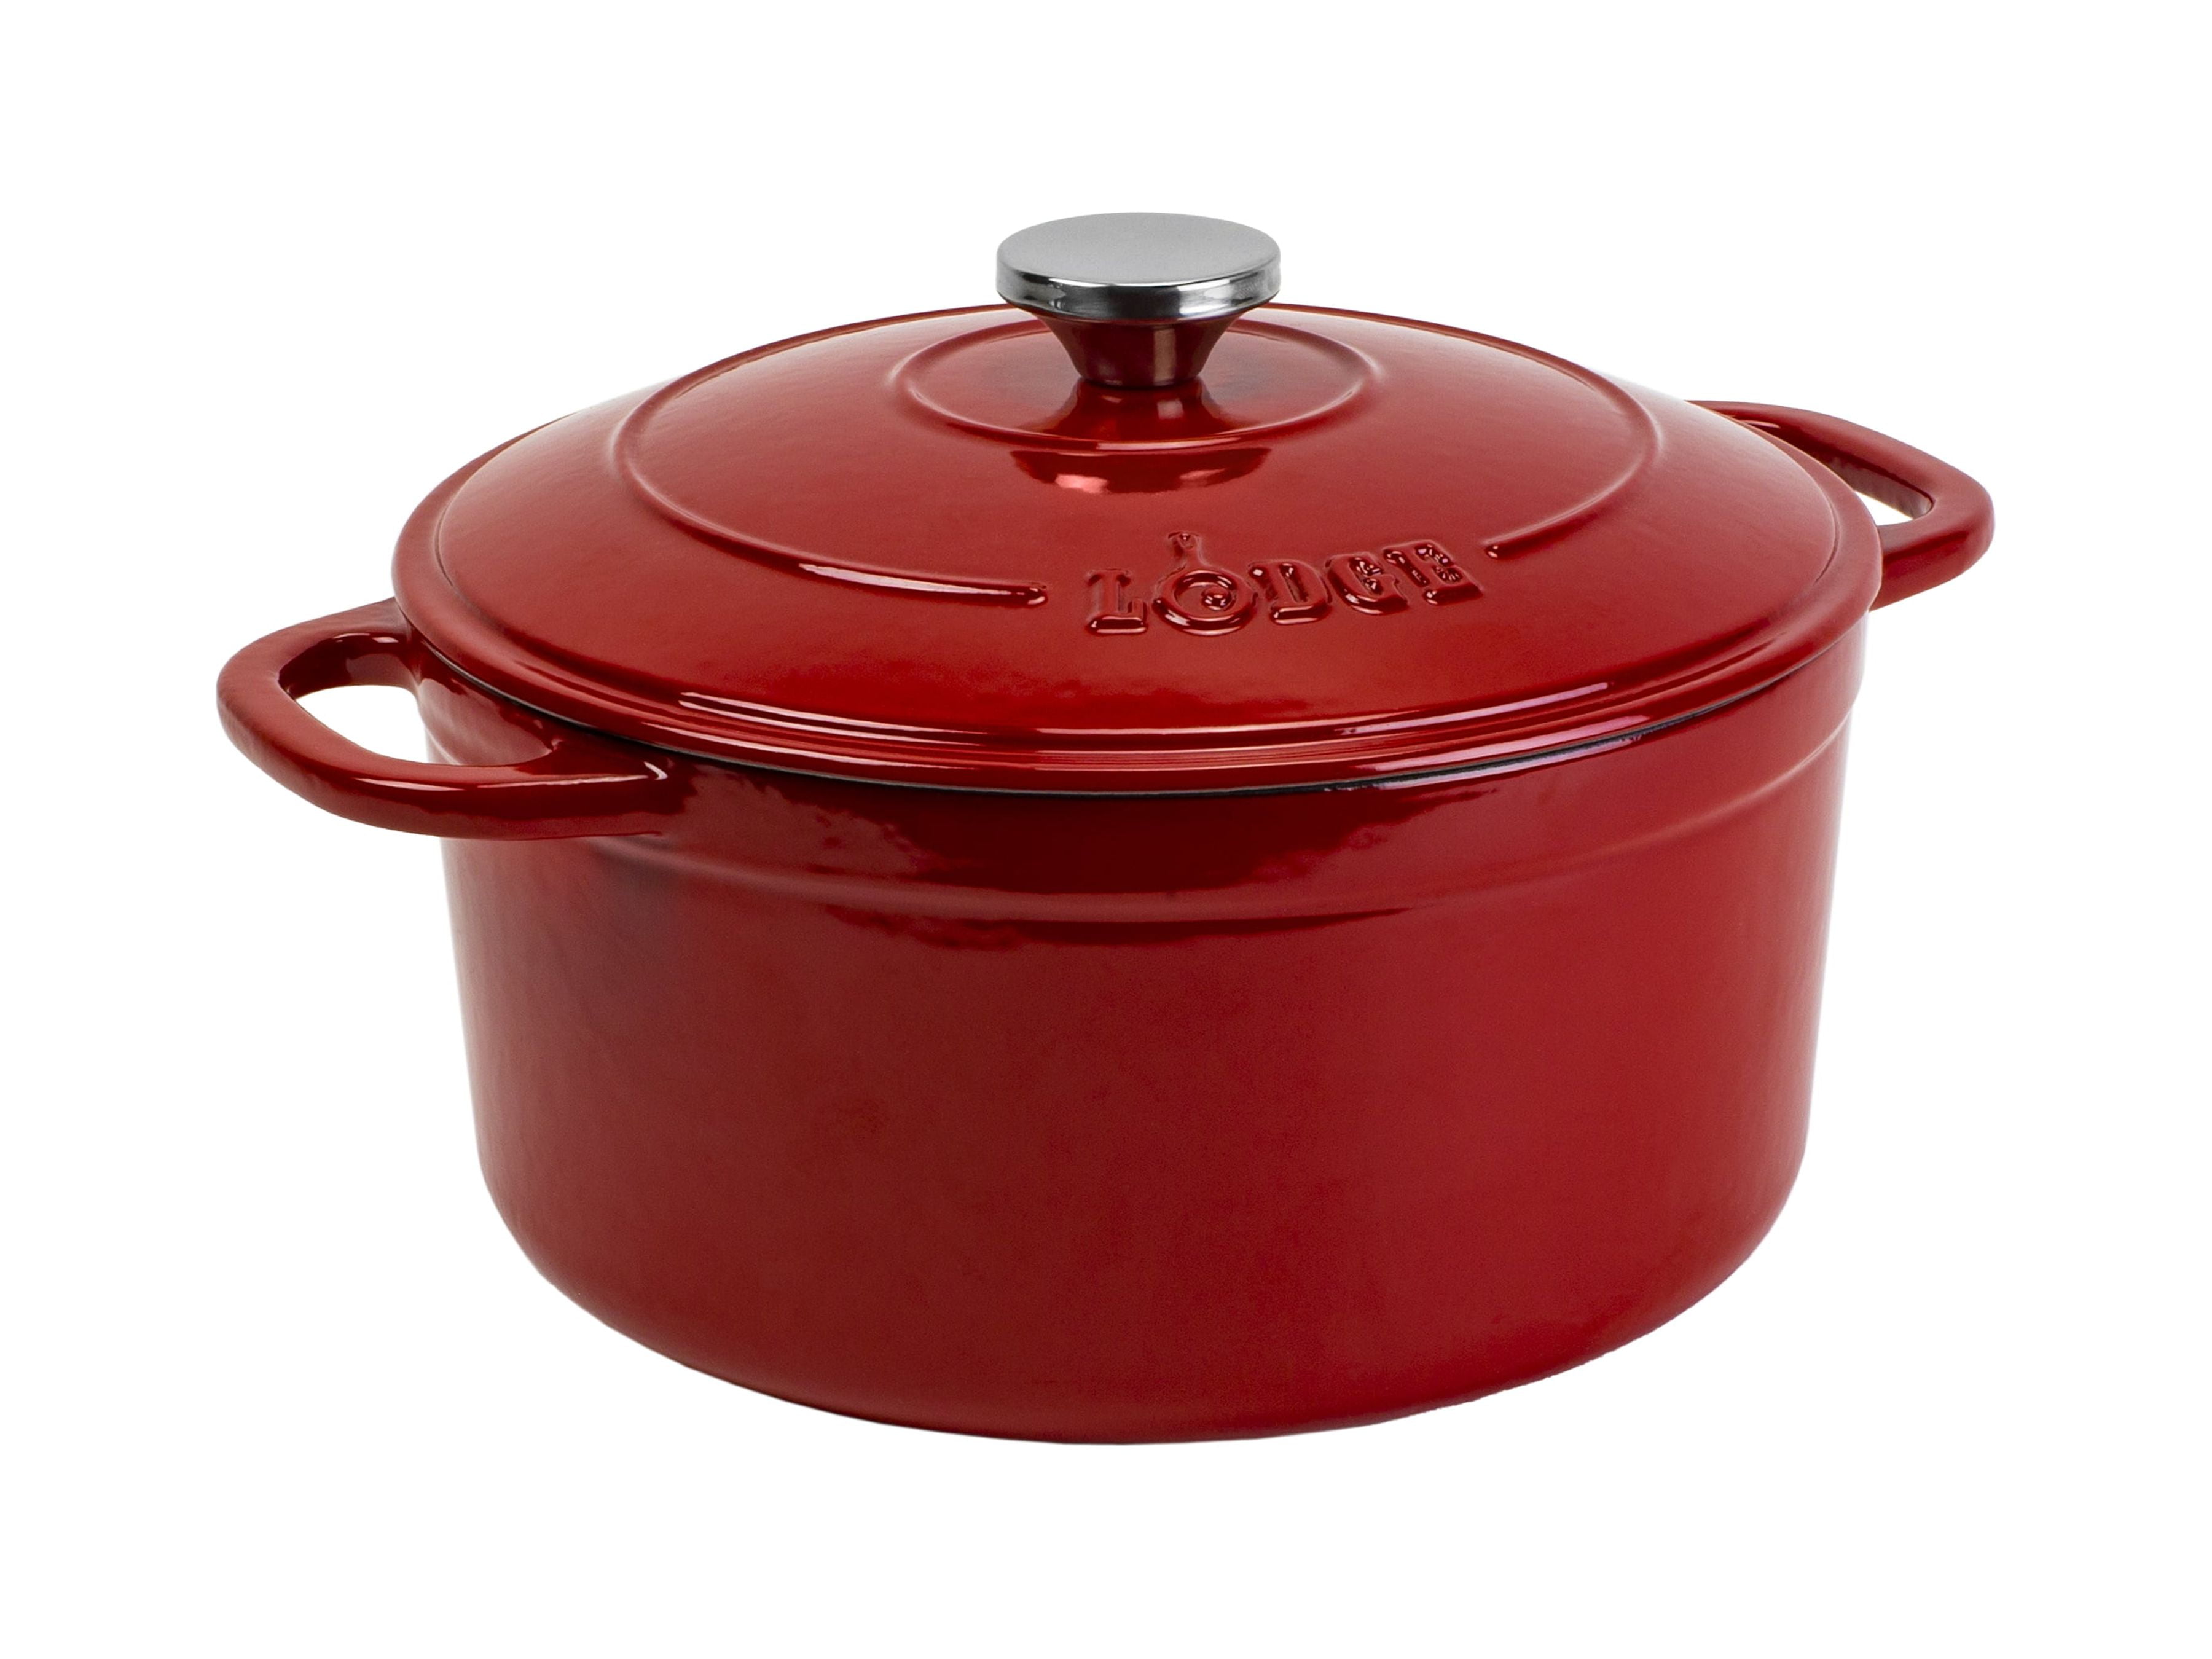 Lodge USA Enamel 4.5 Qt Enameled Cast Iron Dutch Oven - Cast Iron Cookware  - Dutch Oven Pot with Lid - Smoothing Sailing Color - 4.5 Qt Capacity